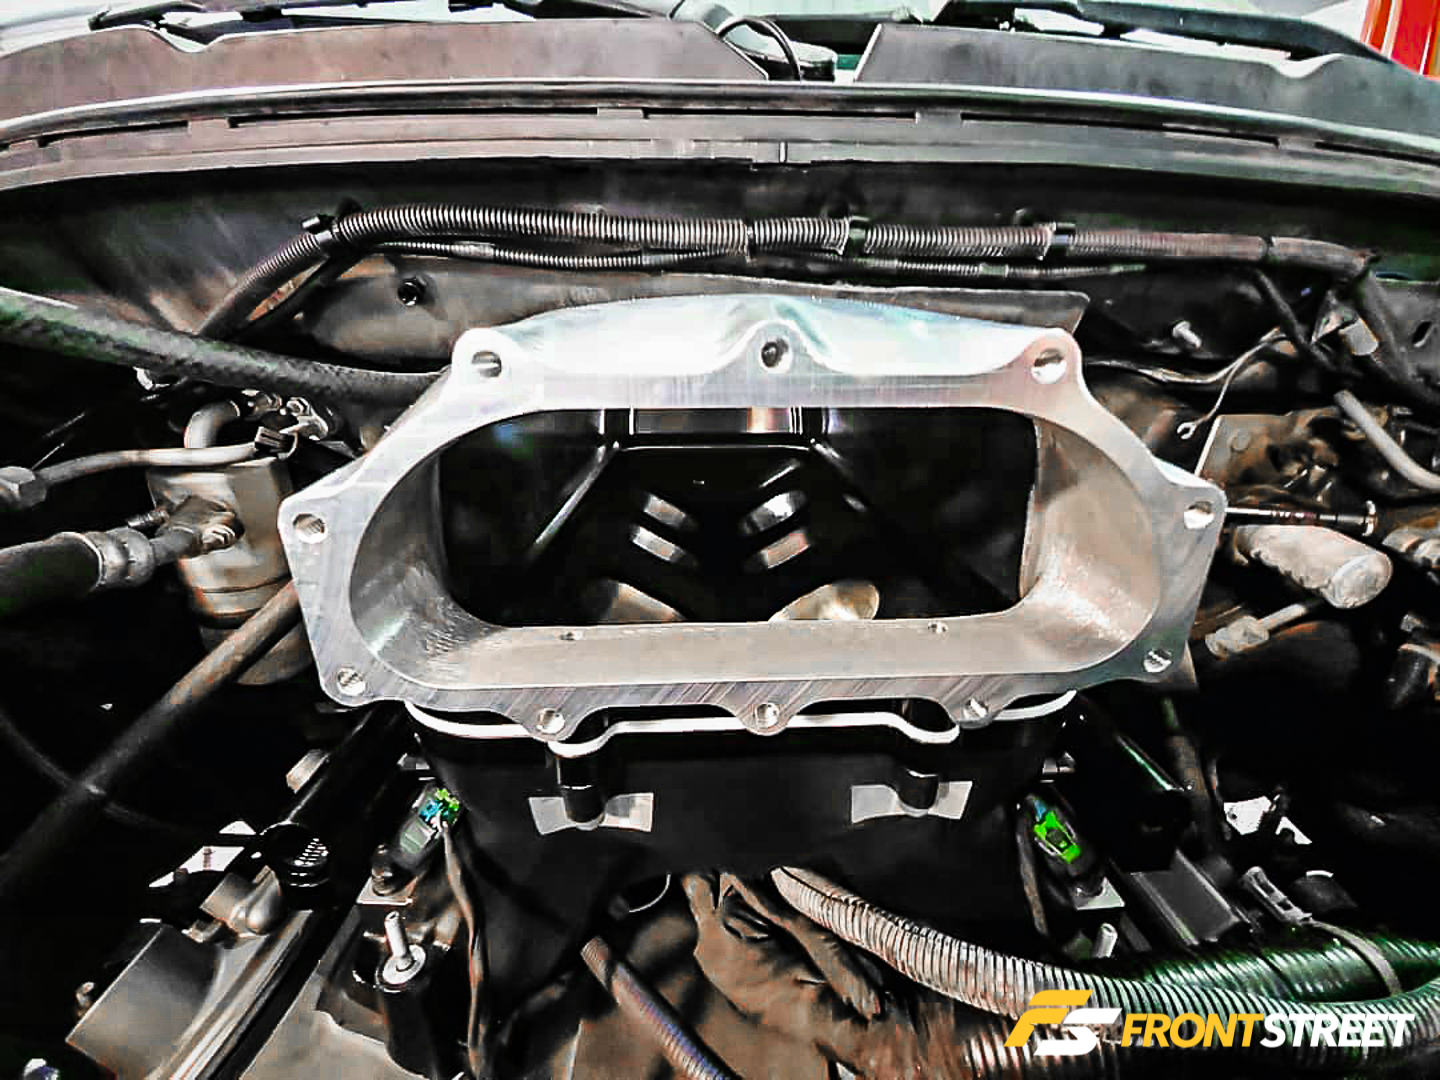 This Wild Naturally Aspirated 478 Cubic-Inch LT1 Engine Makes 778 RWHP